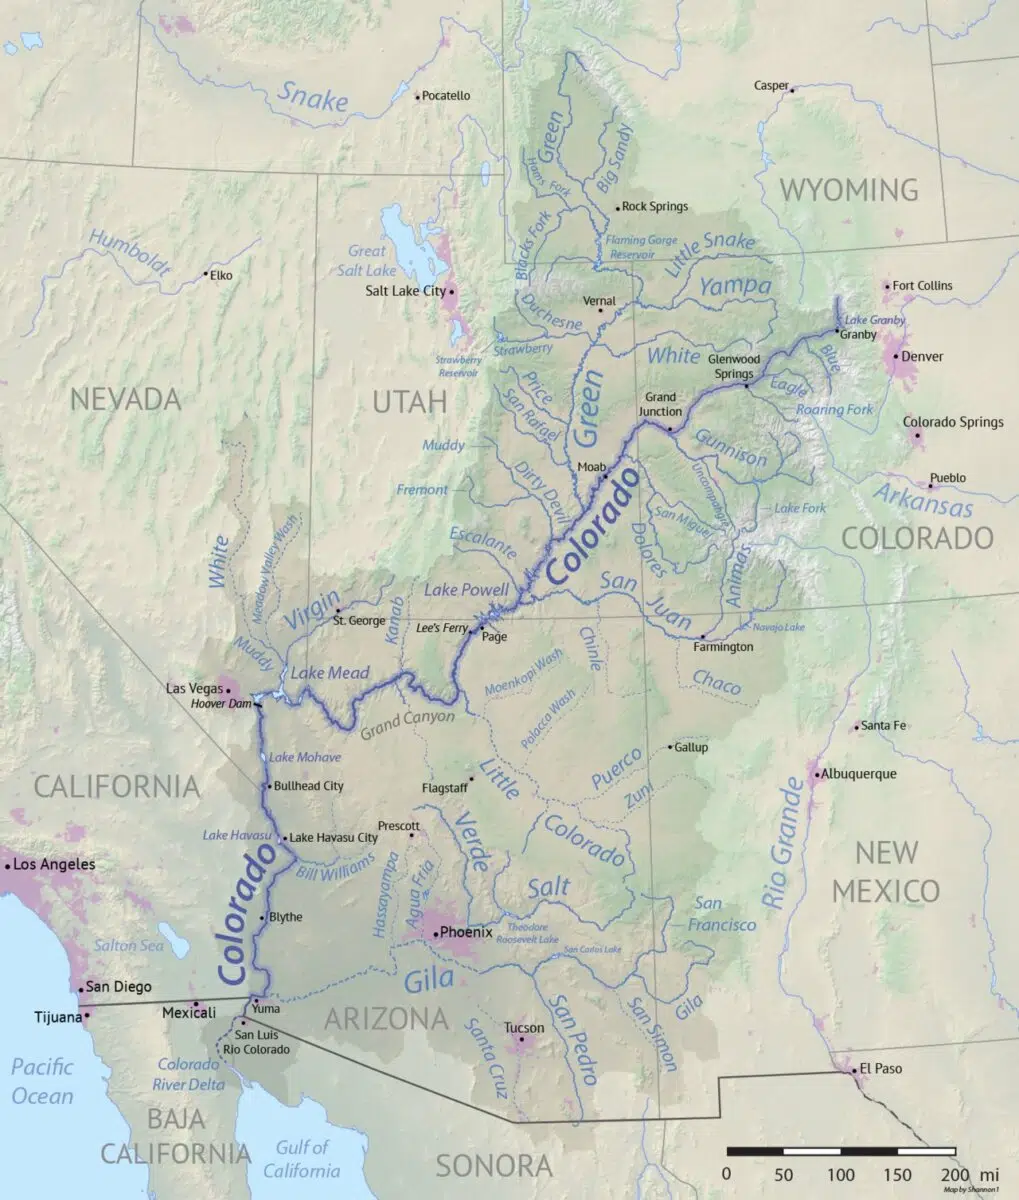 You are currently viewing Bassin versant du Colorado